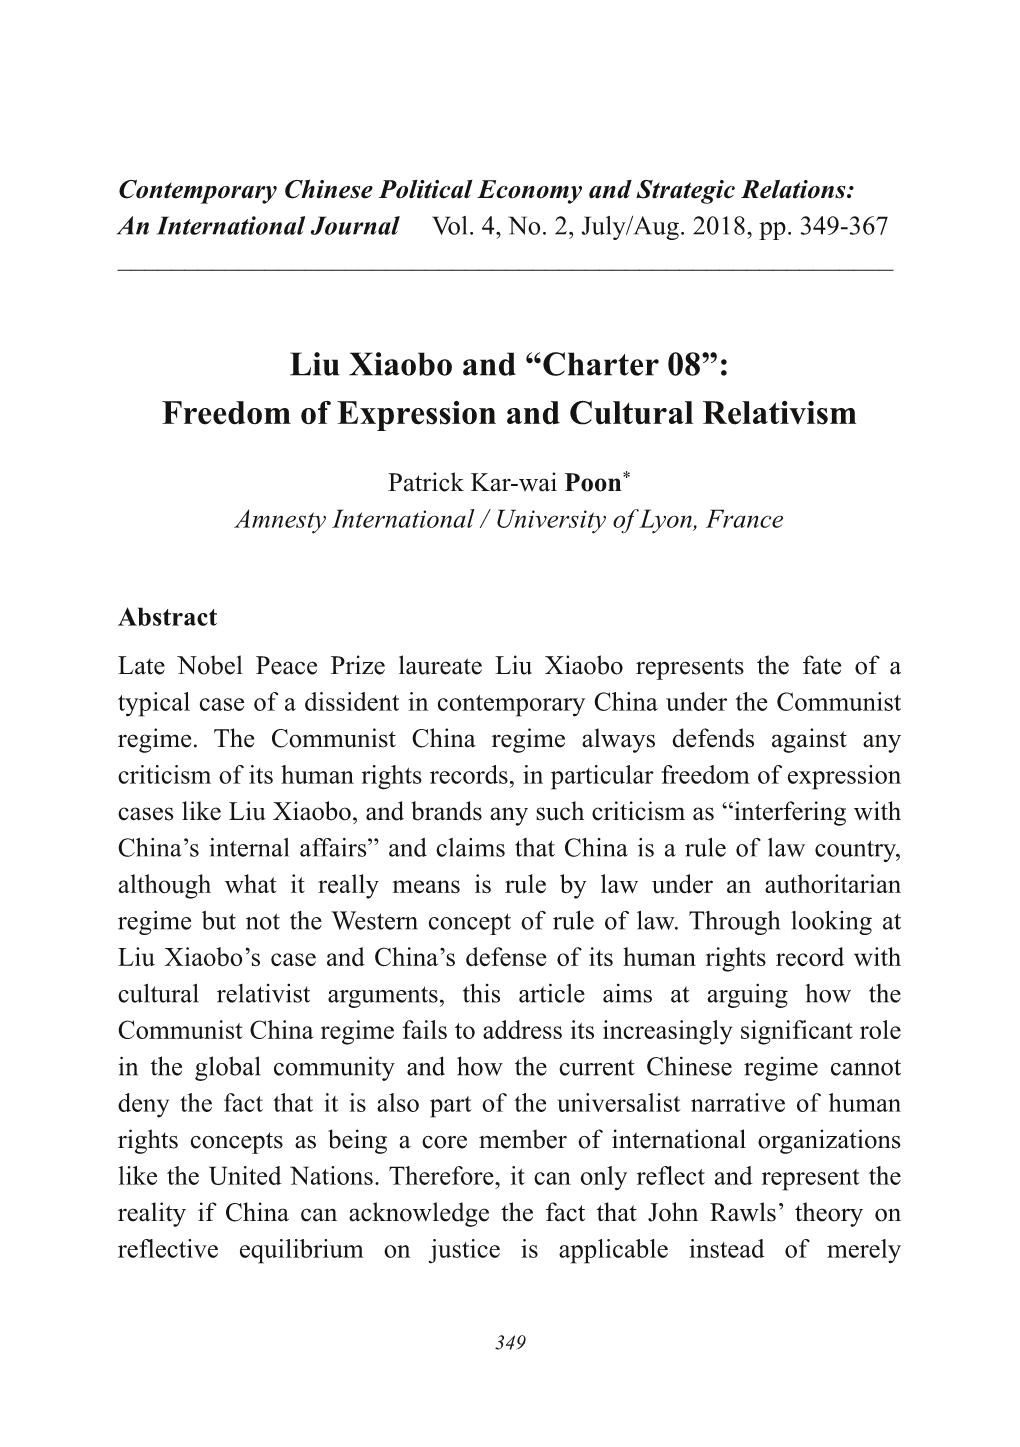 Liu Xiaobo and “Charter 08”: Freedom of Expression and Cultural Relativism